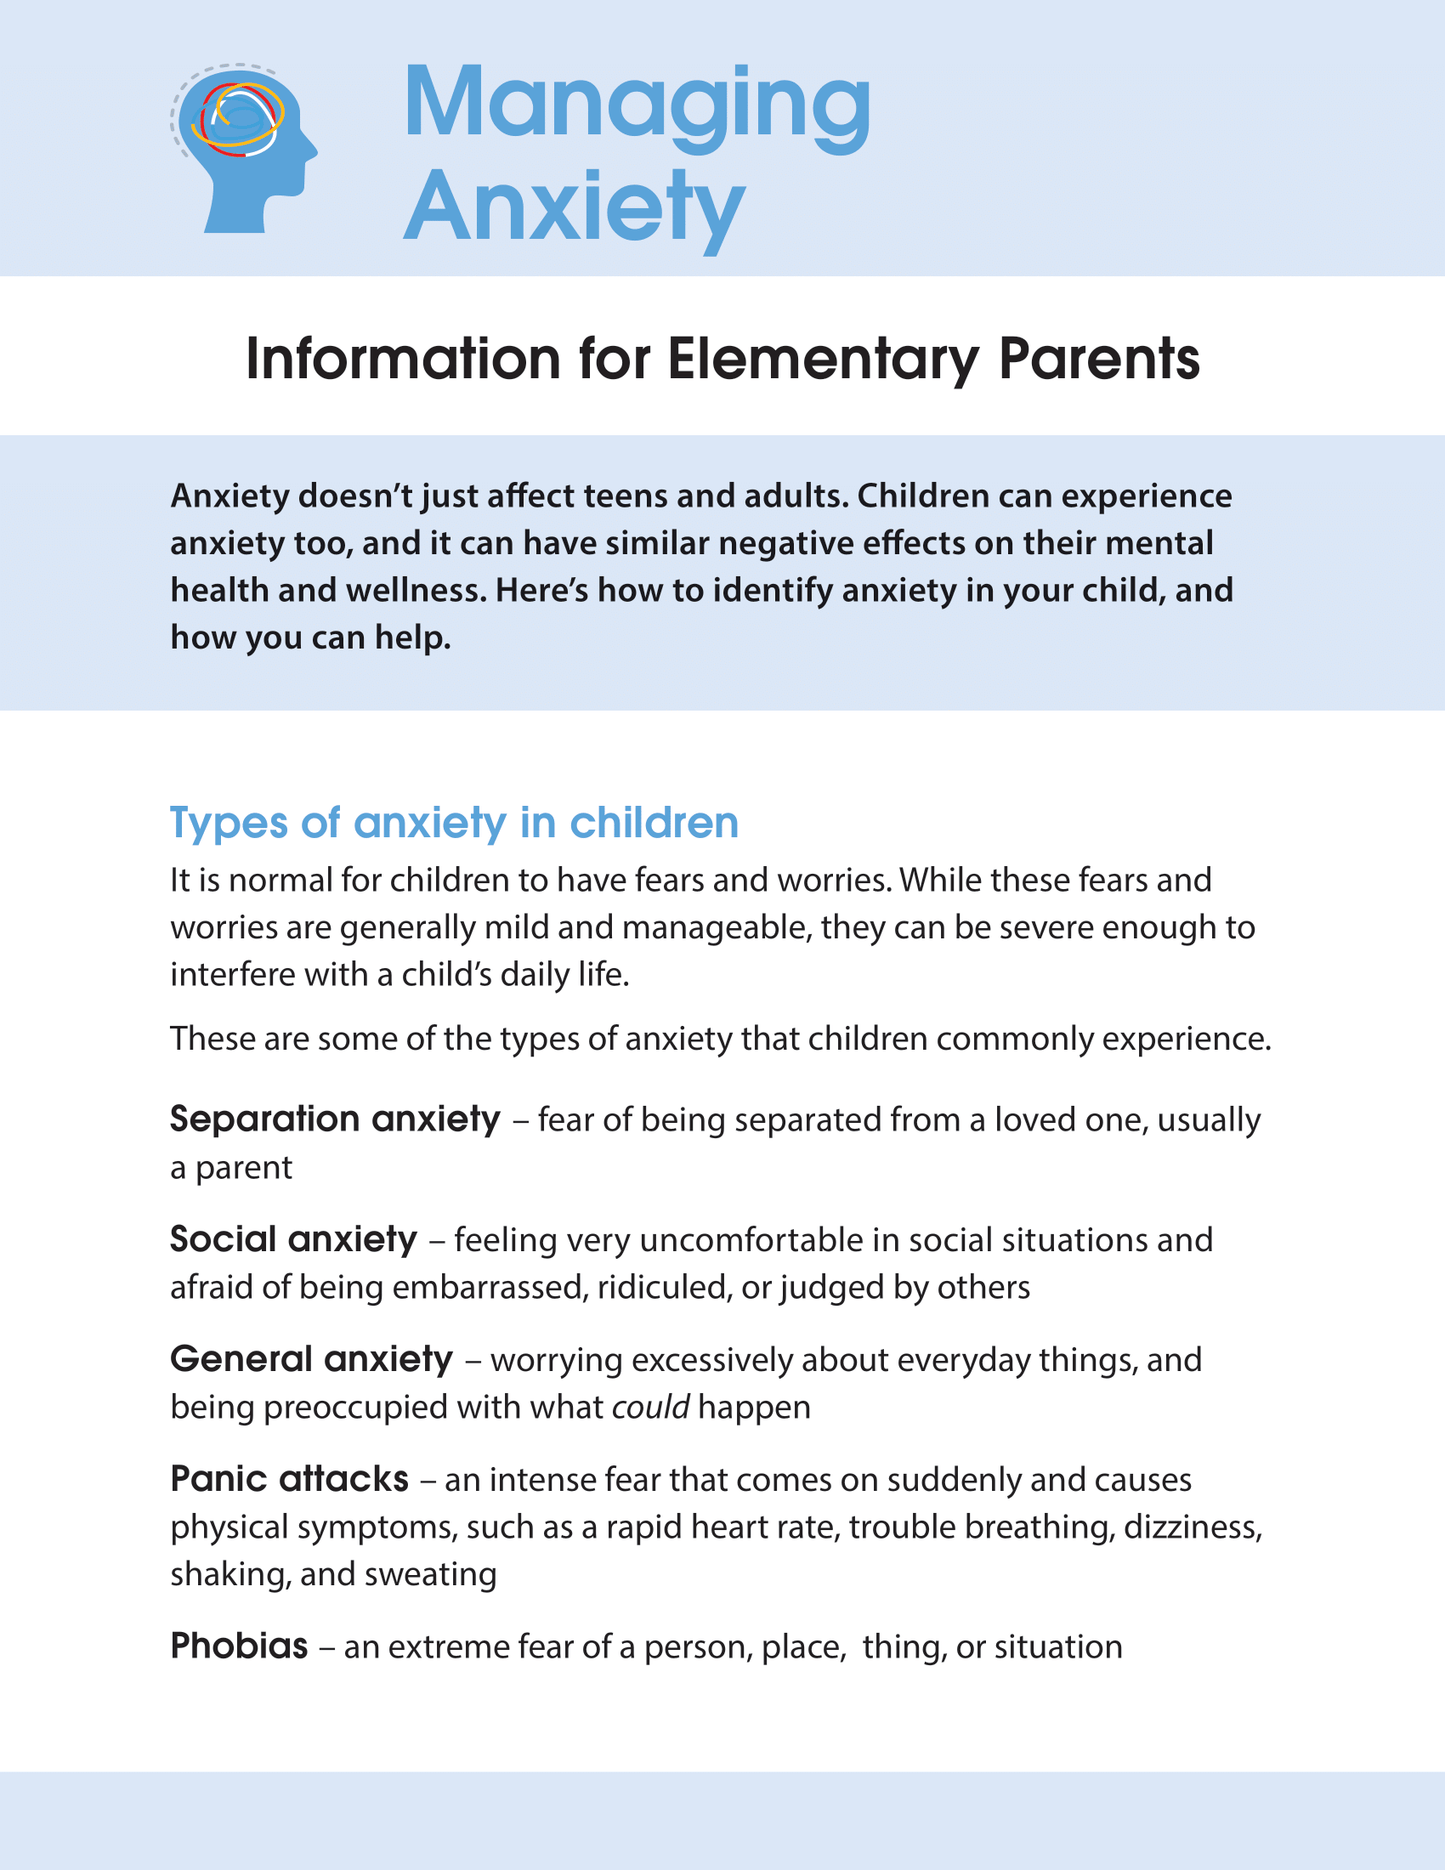 Managing Anxiety - Information for Elementary Parents